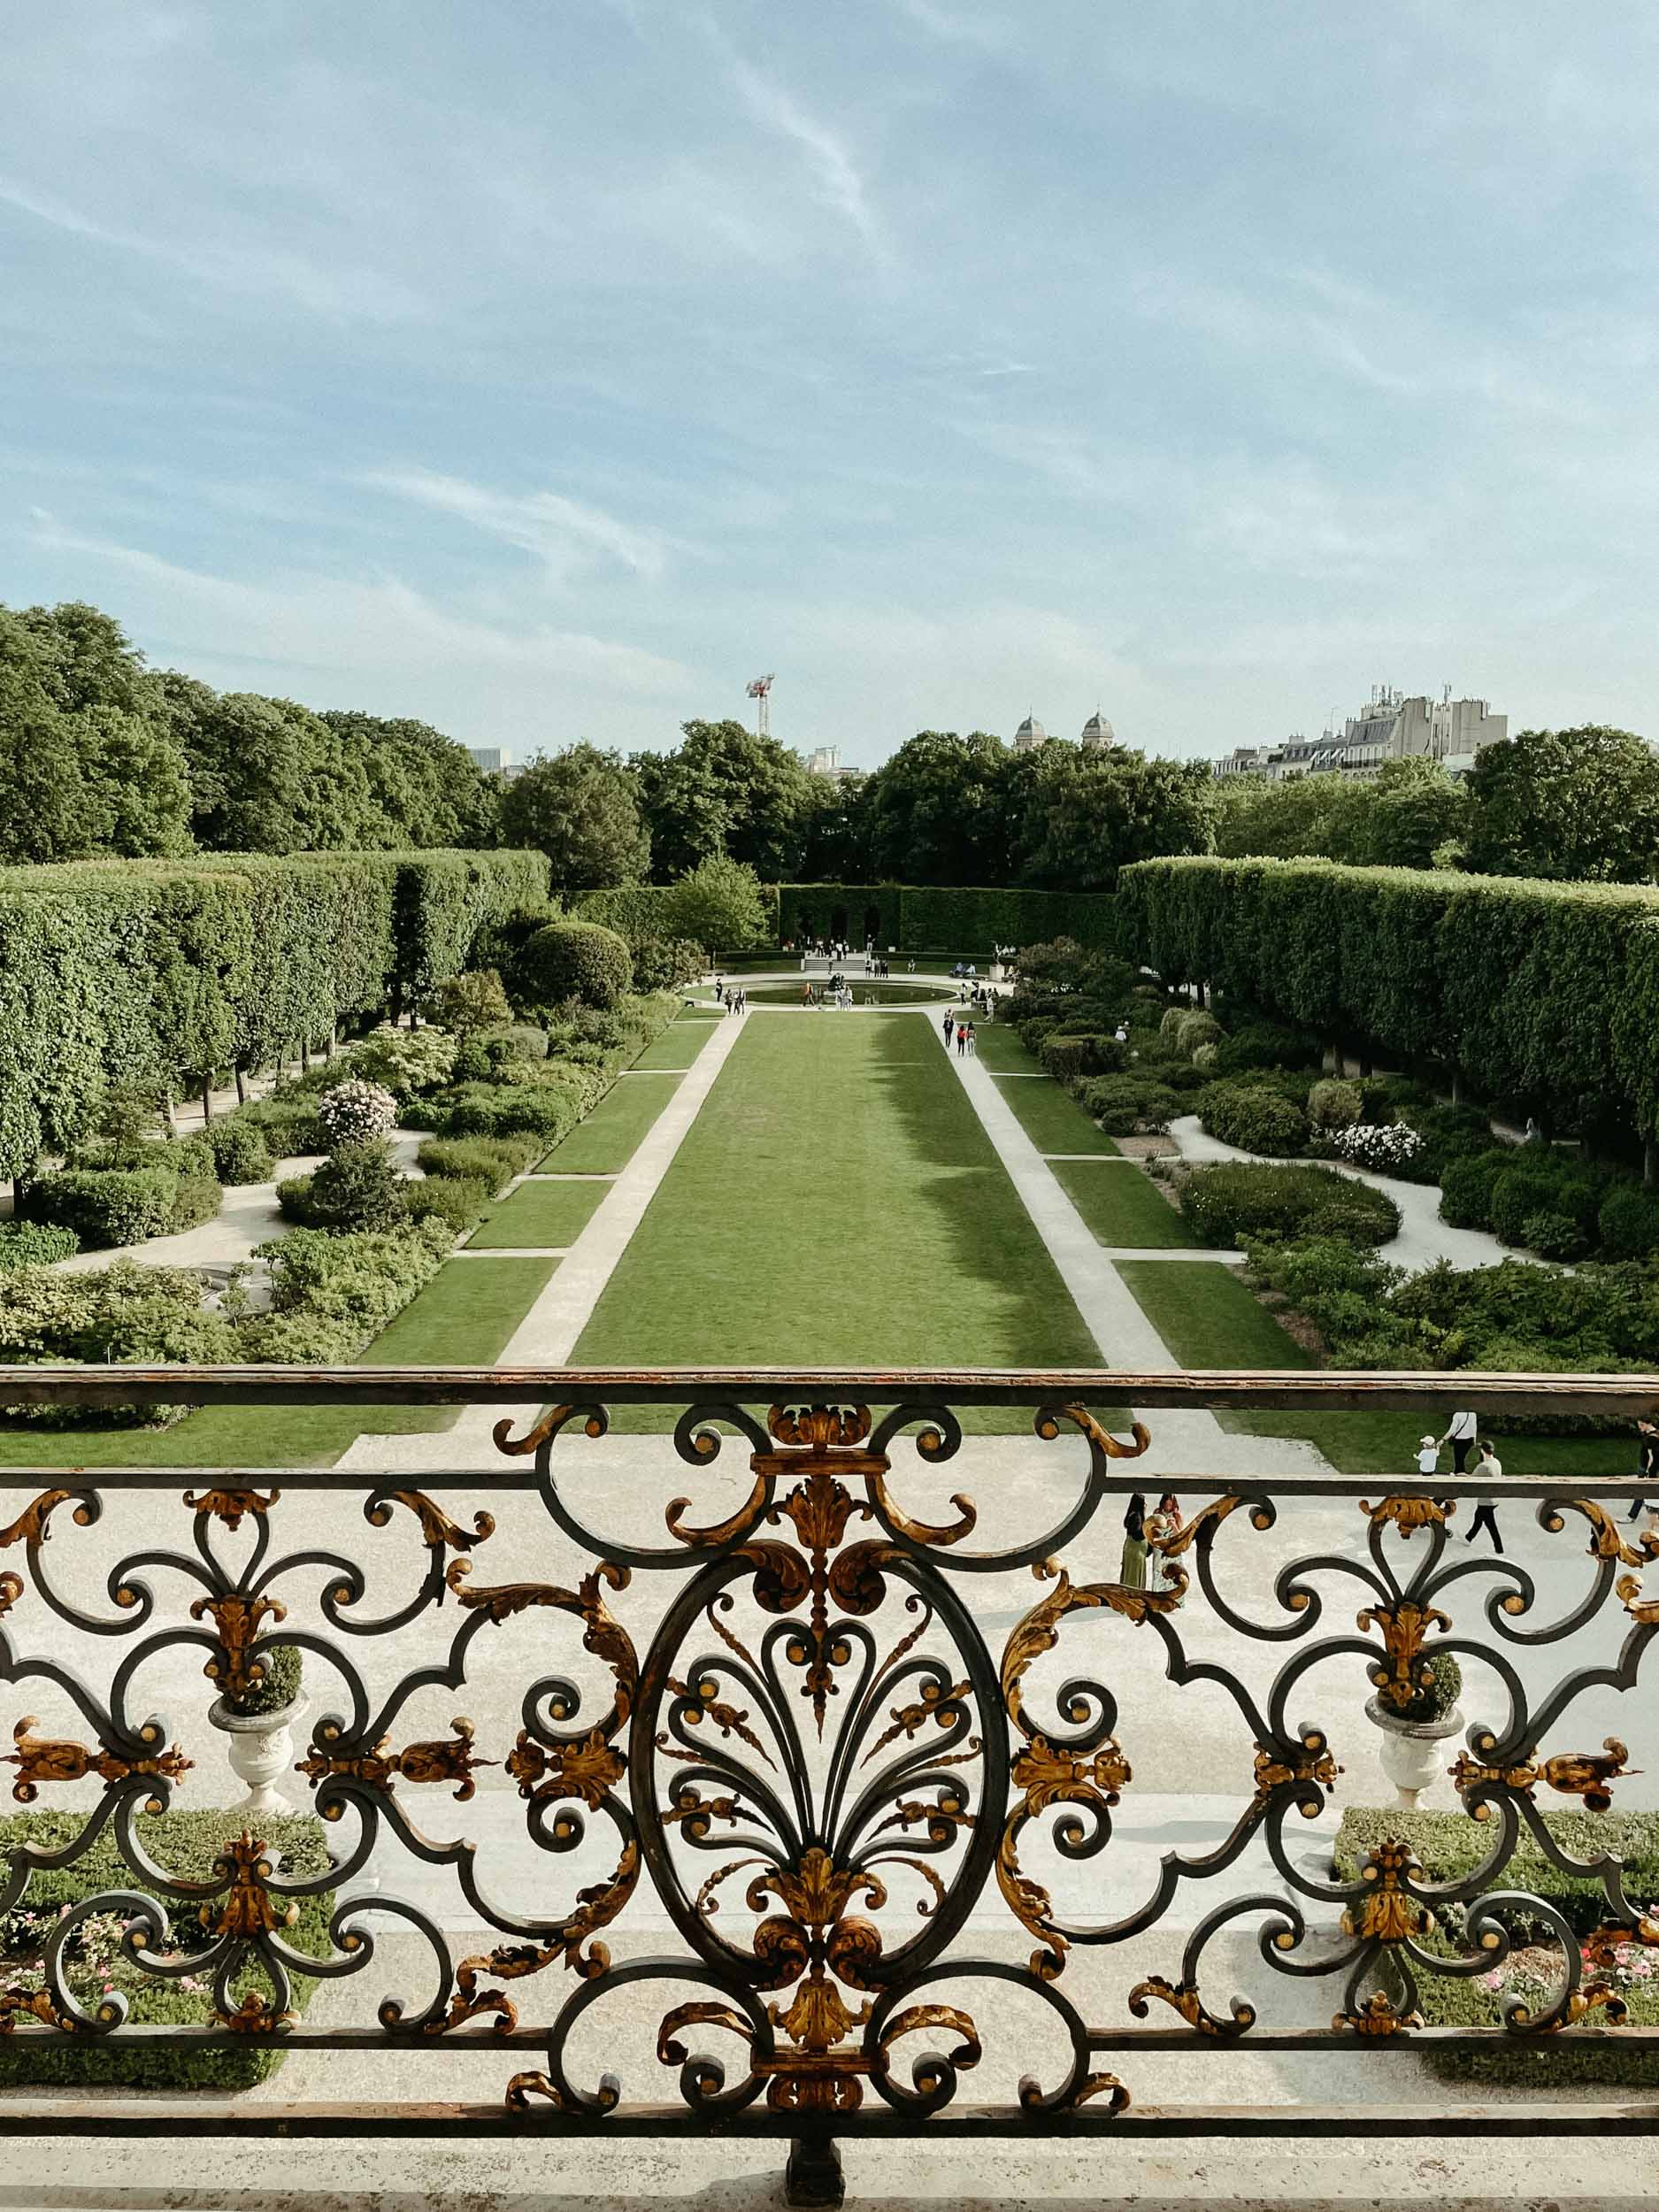 A view overlooking the garden at the Rodin Museum in Paris, France.